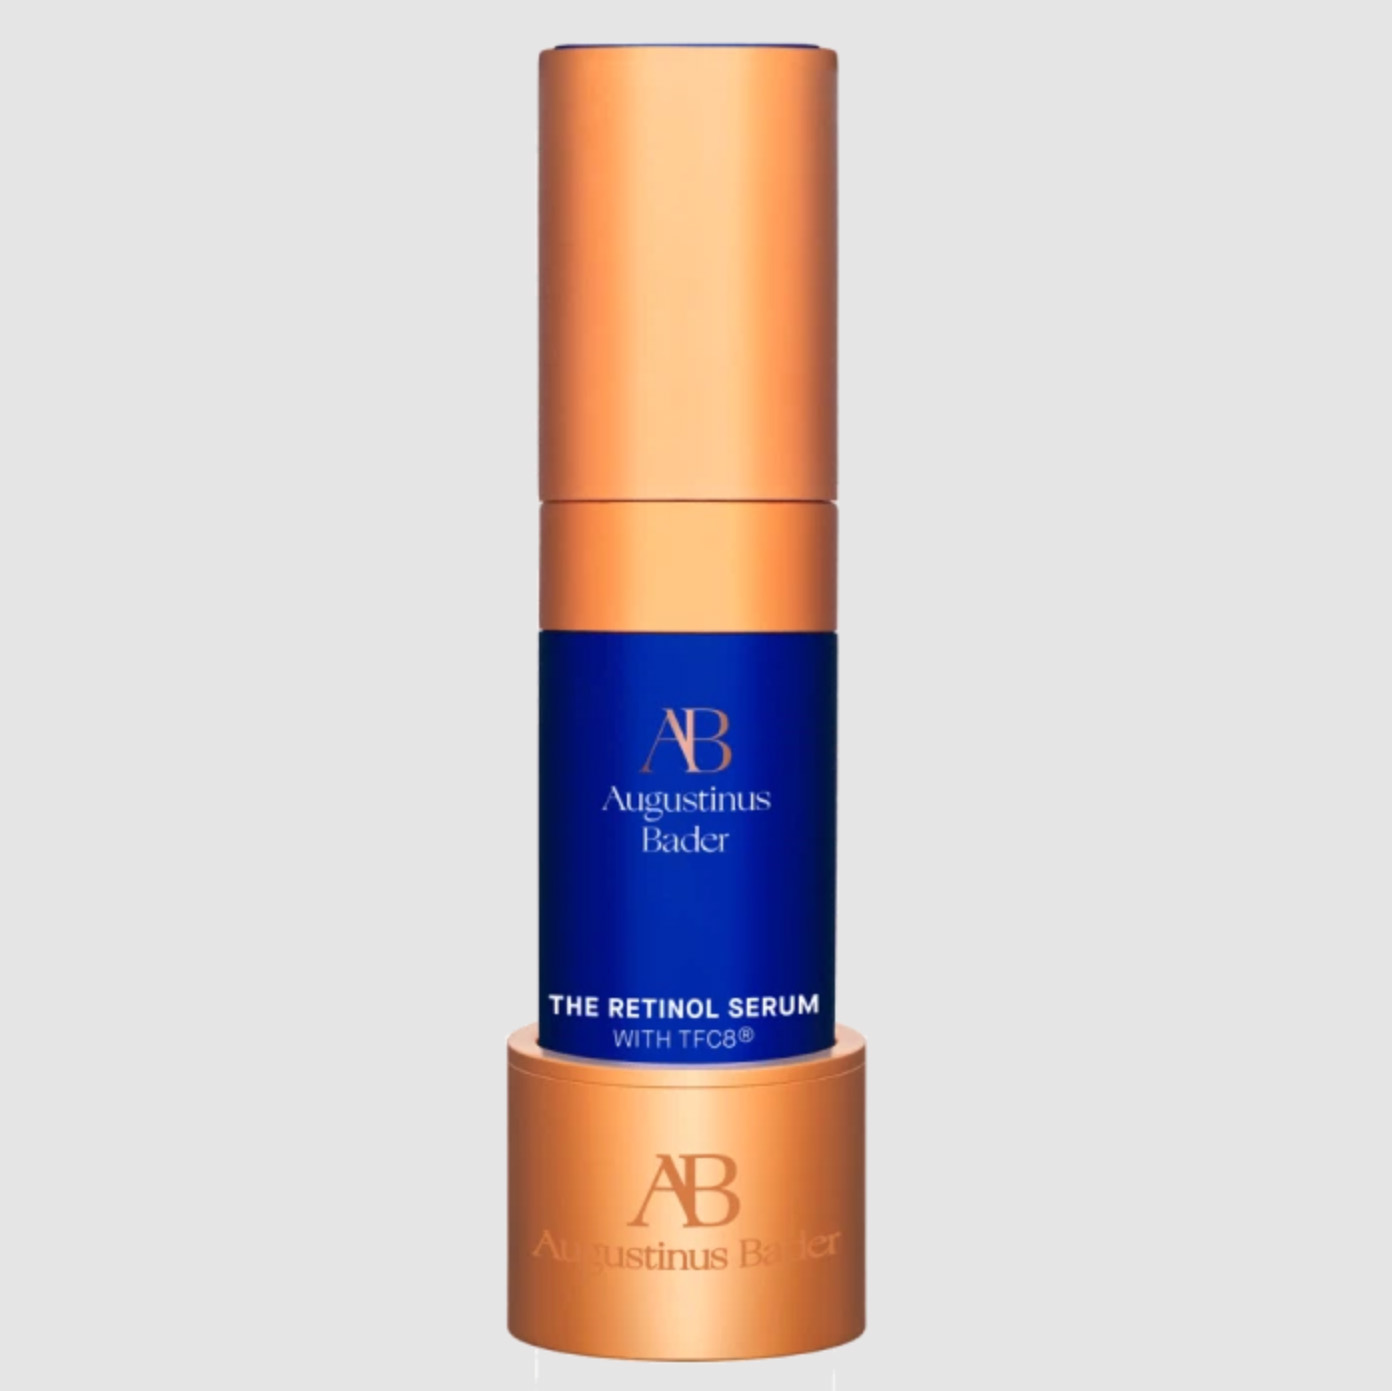 The Retinol Serum in blue and gold bottle